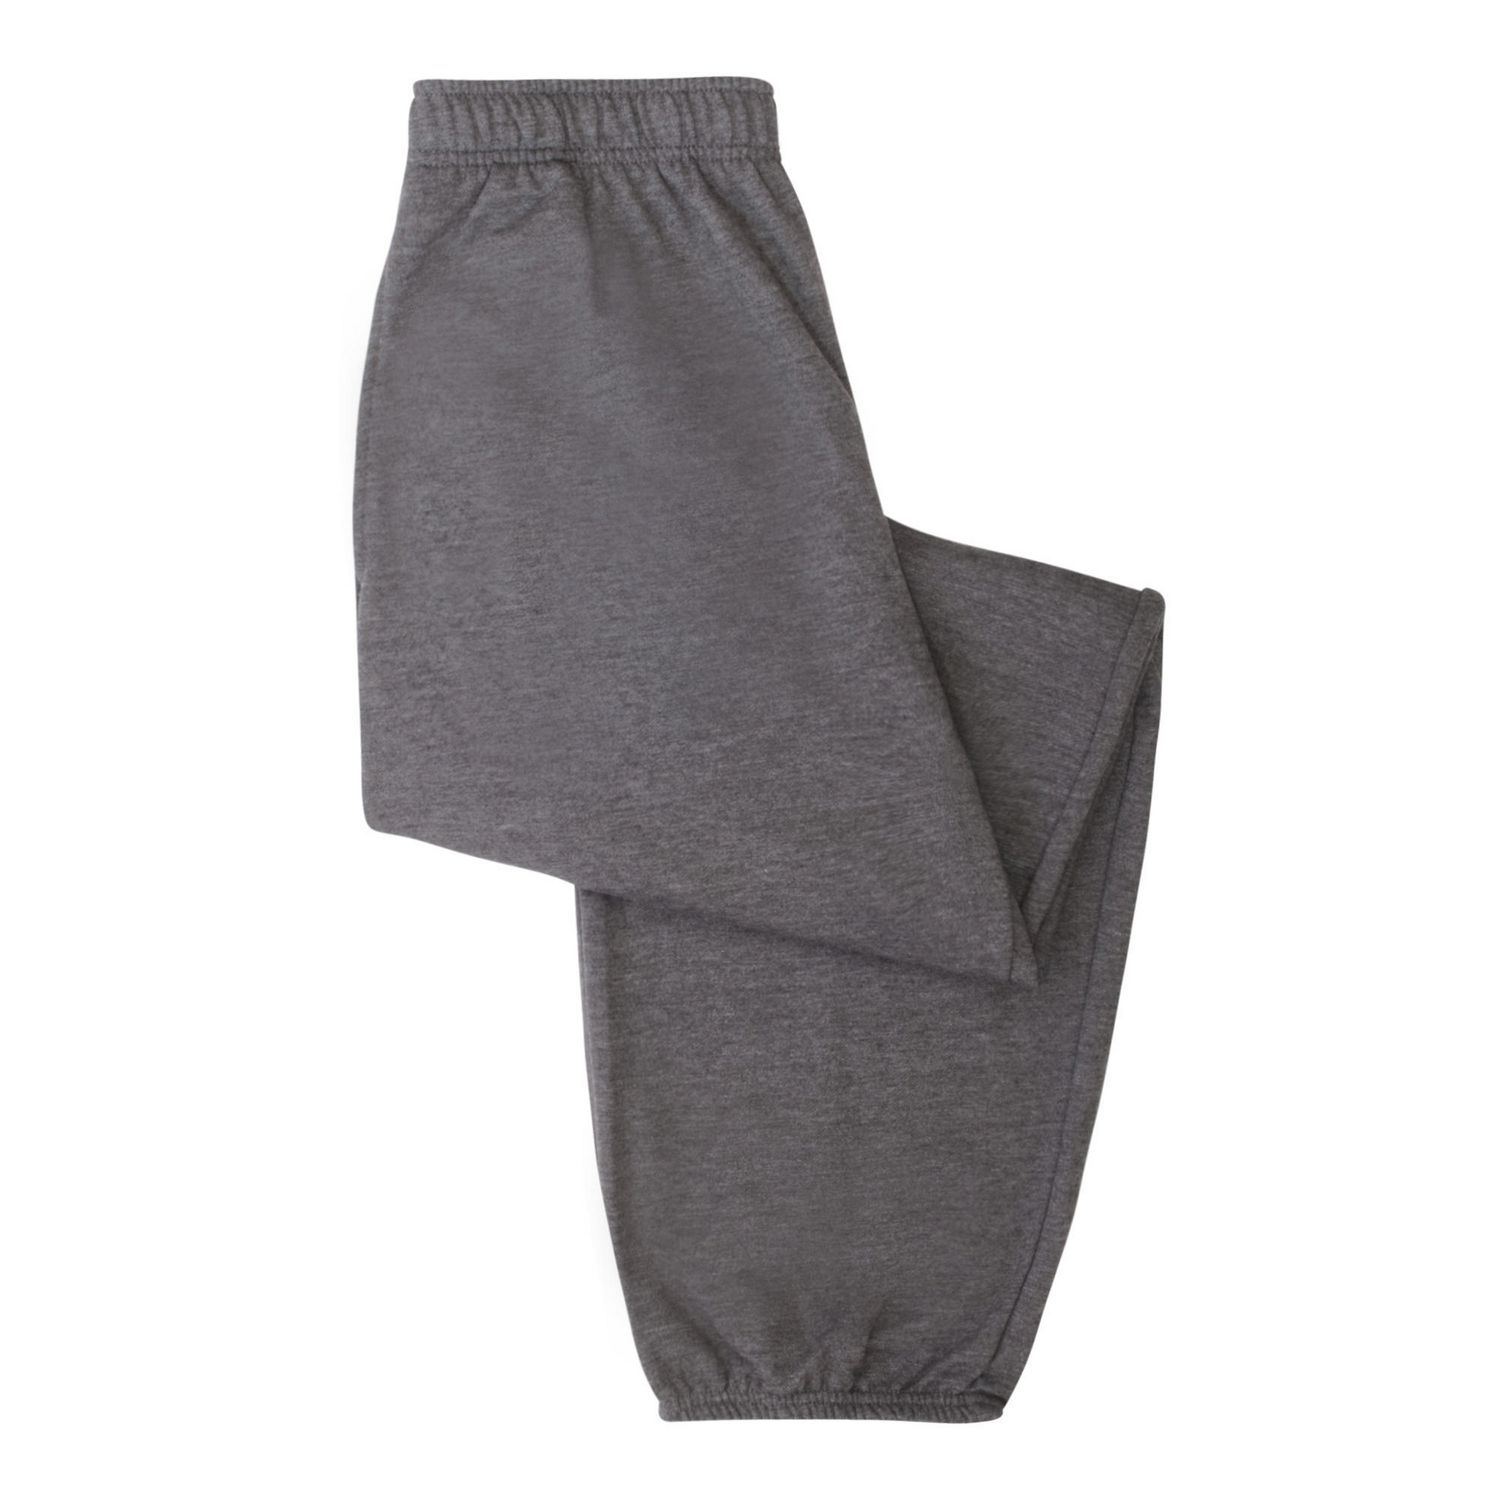 Athletic Works women sweatpants Gray Size L - $8 - From Molly